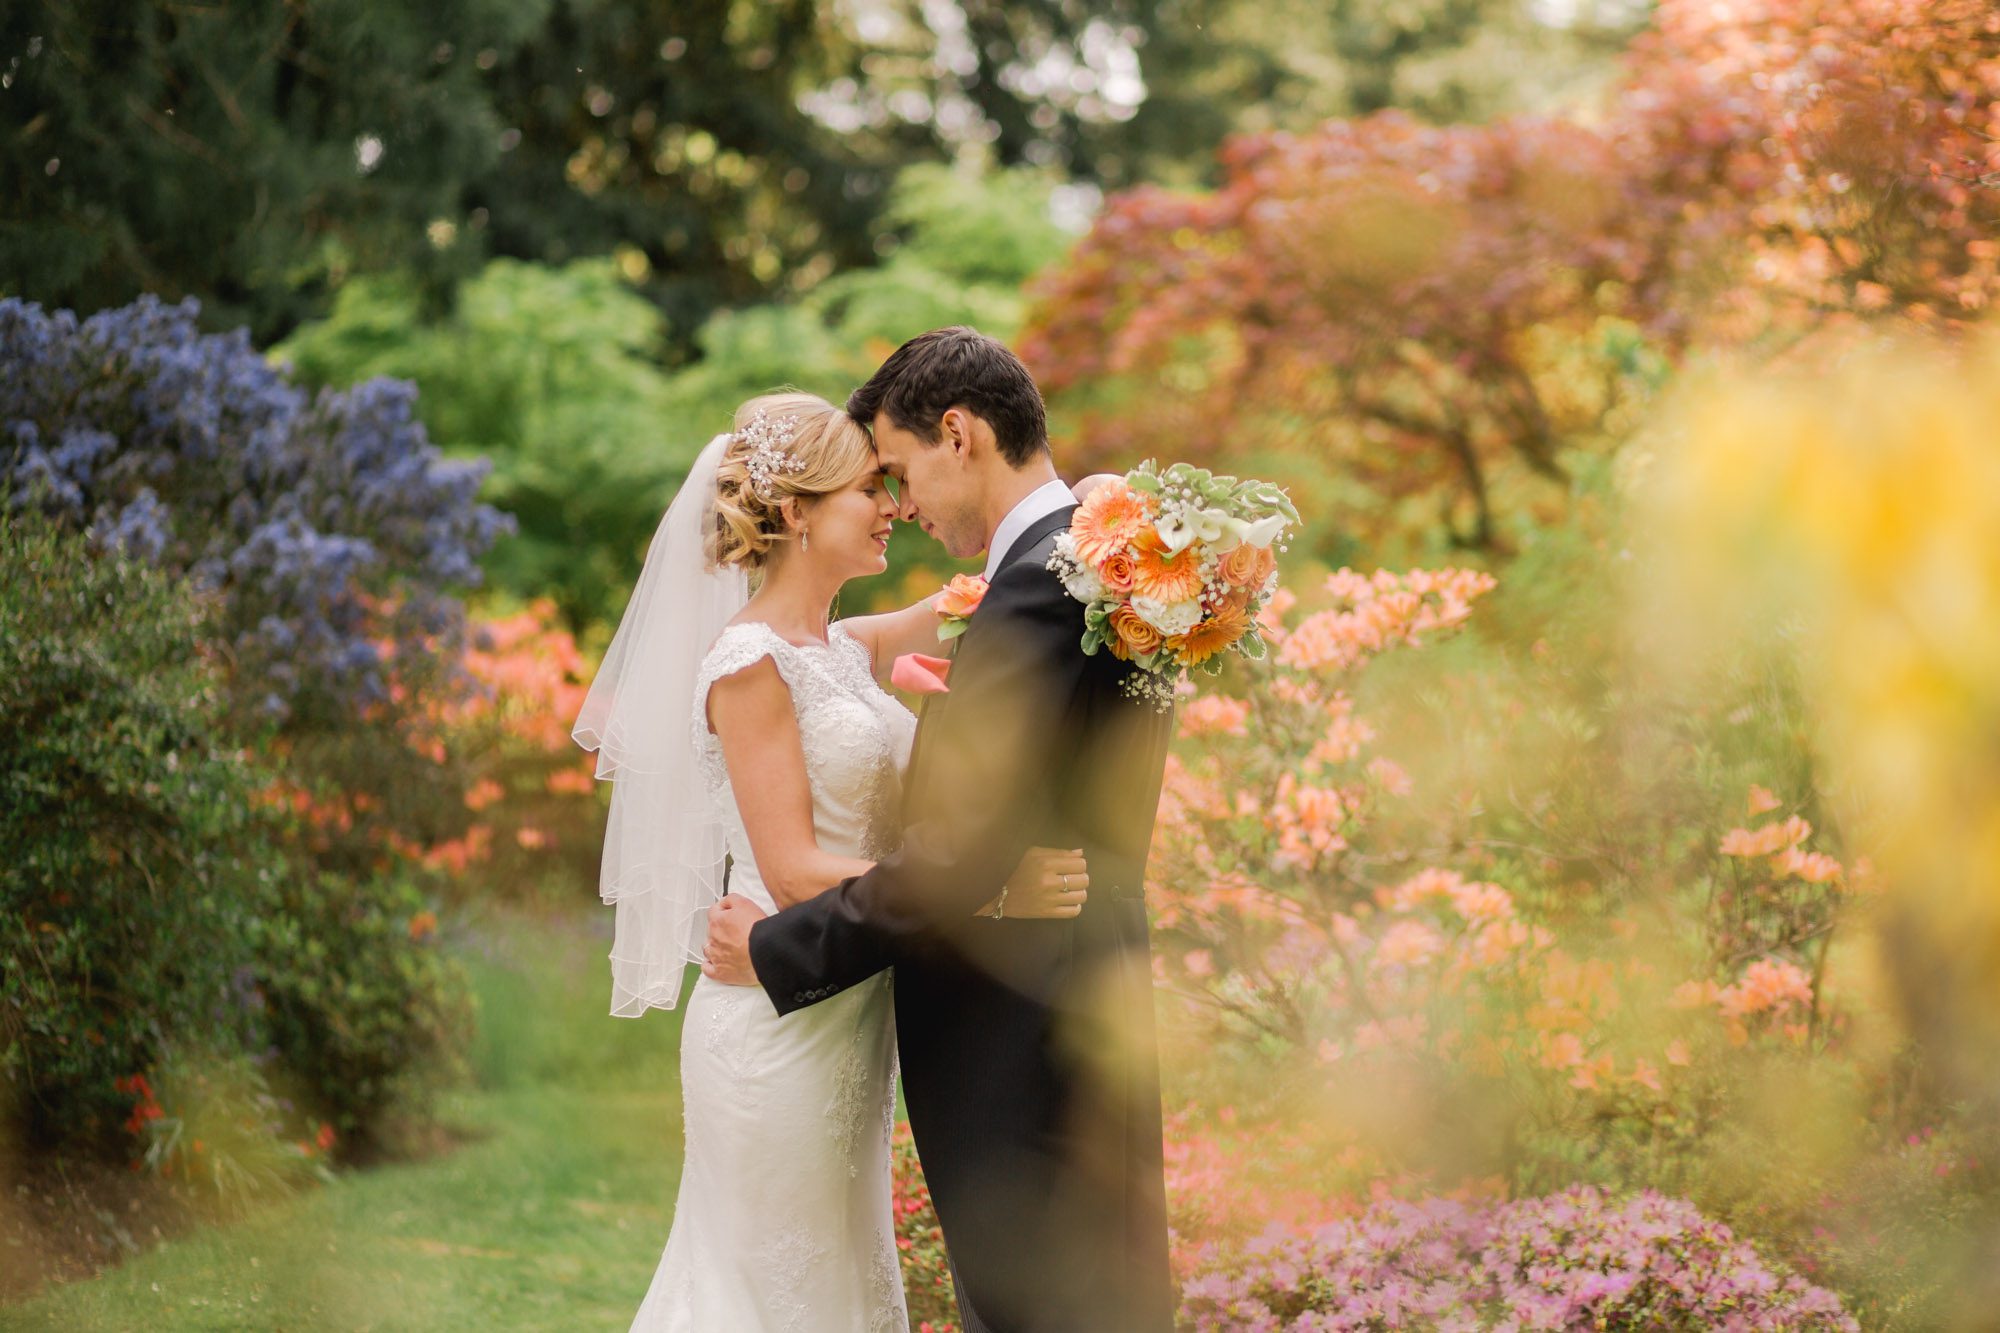 Bride and groom hug closely on their wedding day in the Ramster gardens in Summer.